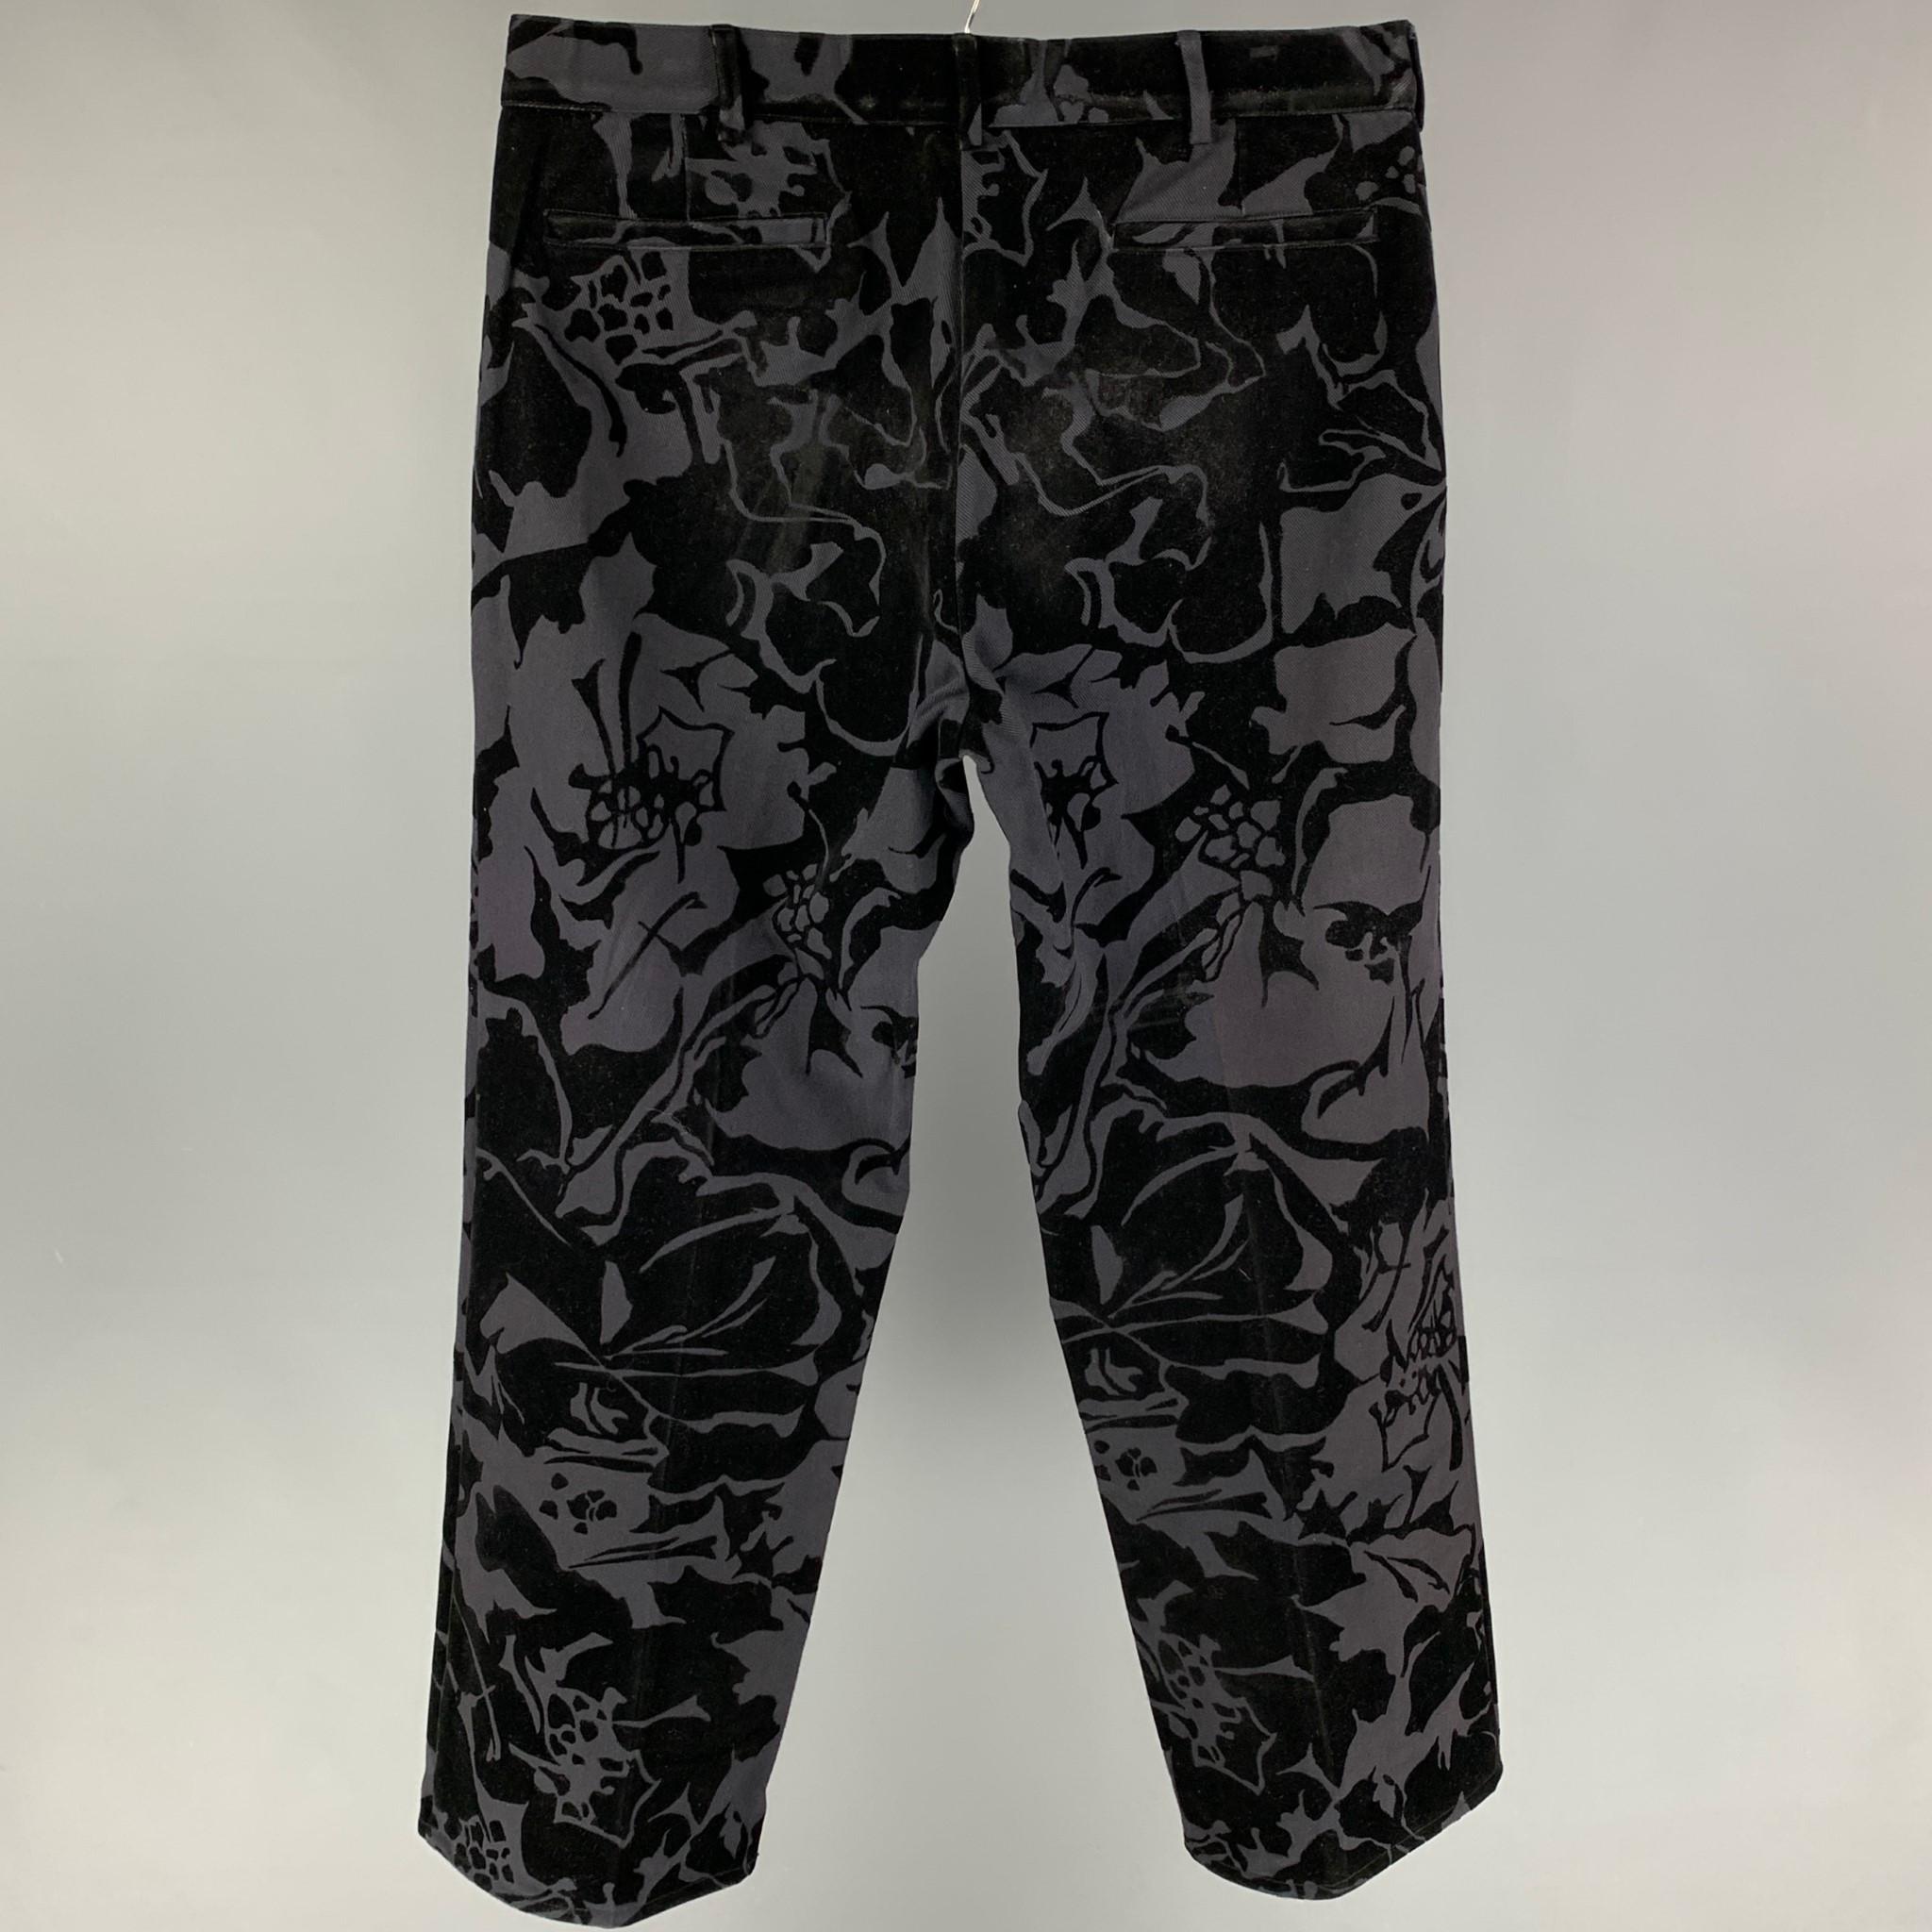 Vintage VERSUS by GIANNI VERSACE pants comes in a black velvet jacquard cotton featuring a straight leg, front tab, and a zip fly closure. Made in Italy. 

Very Good Pre-Owned Condition.
Marked: 36/50

Measurements:

Waist: 34 in.
Rise: 12